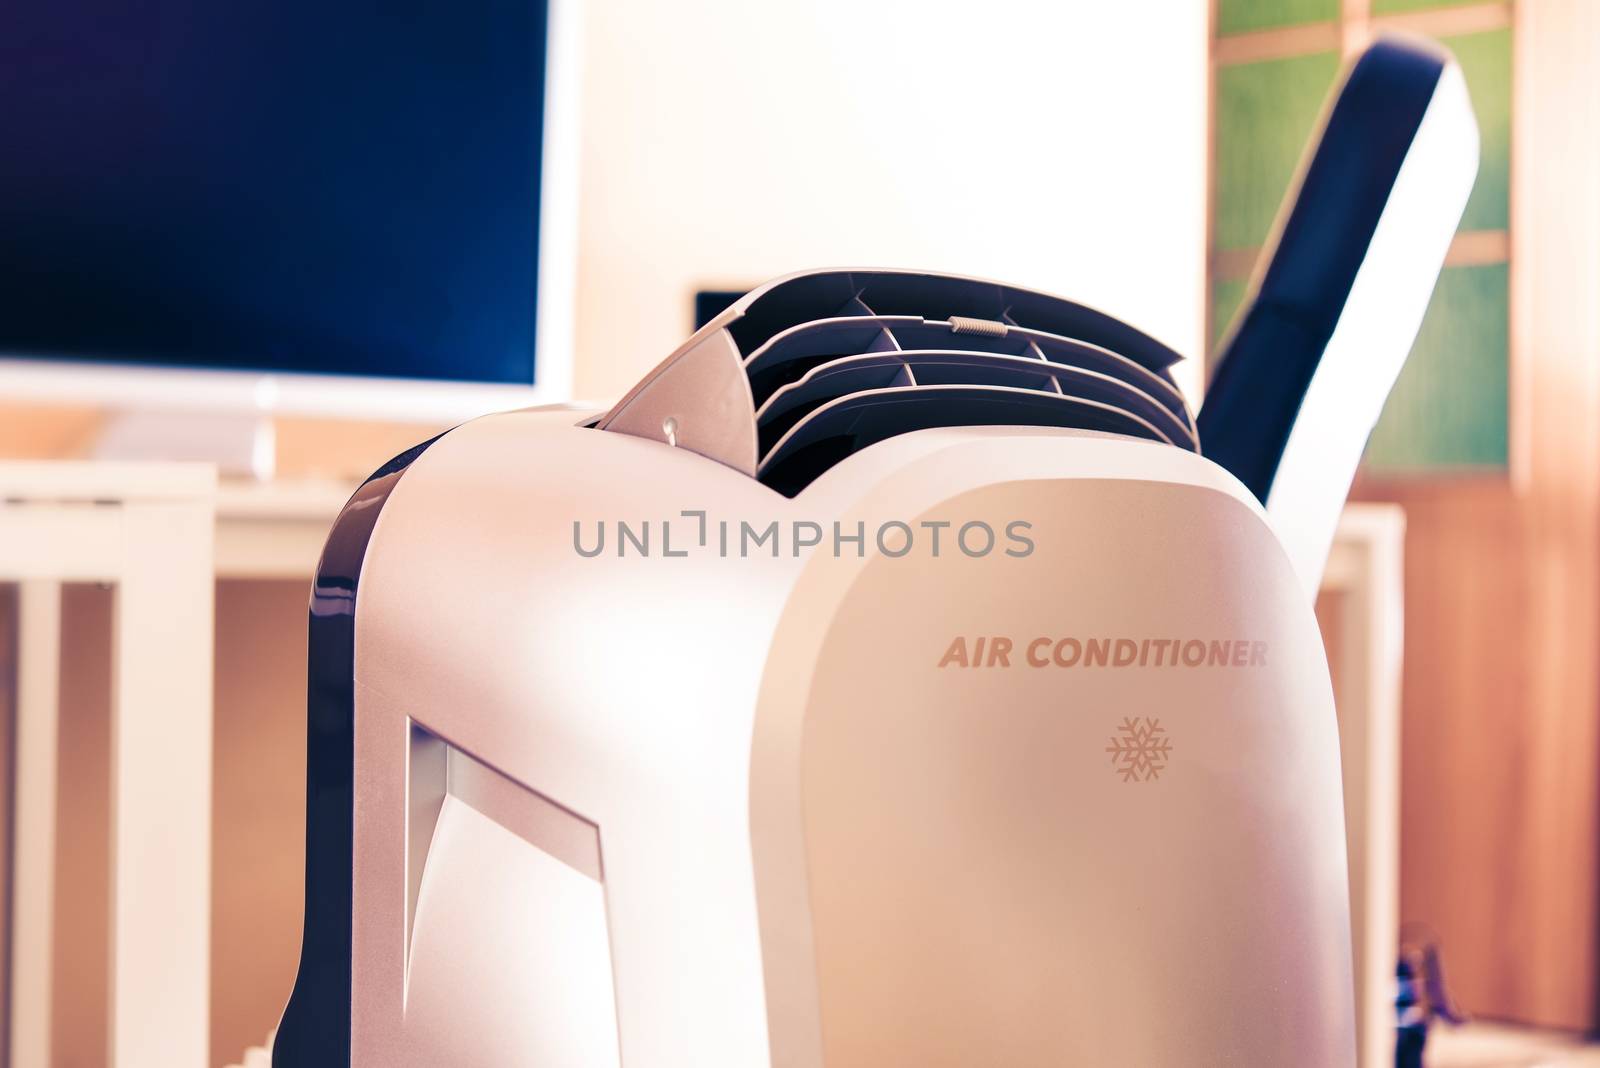 New Portable Air Conditioner in the Office. Cooling Temperature in Office During Hot Summer Season. Air Conditioning. 